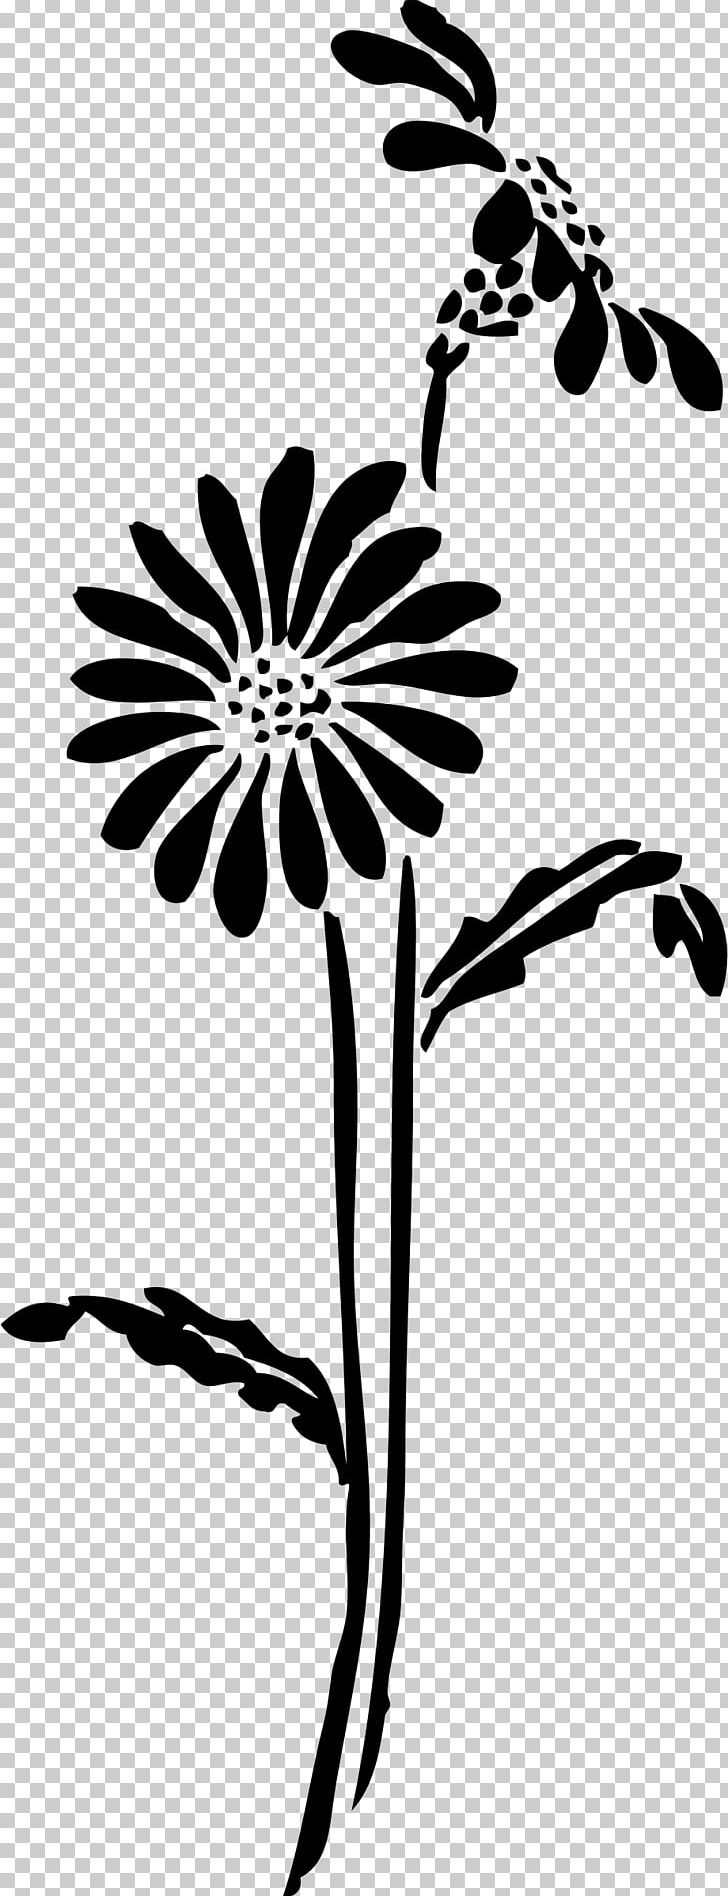 Silhouette Flower Drawing PNG, Clipart, Animals, Art, Black, Black And White, Branch Free PNG Download